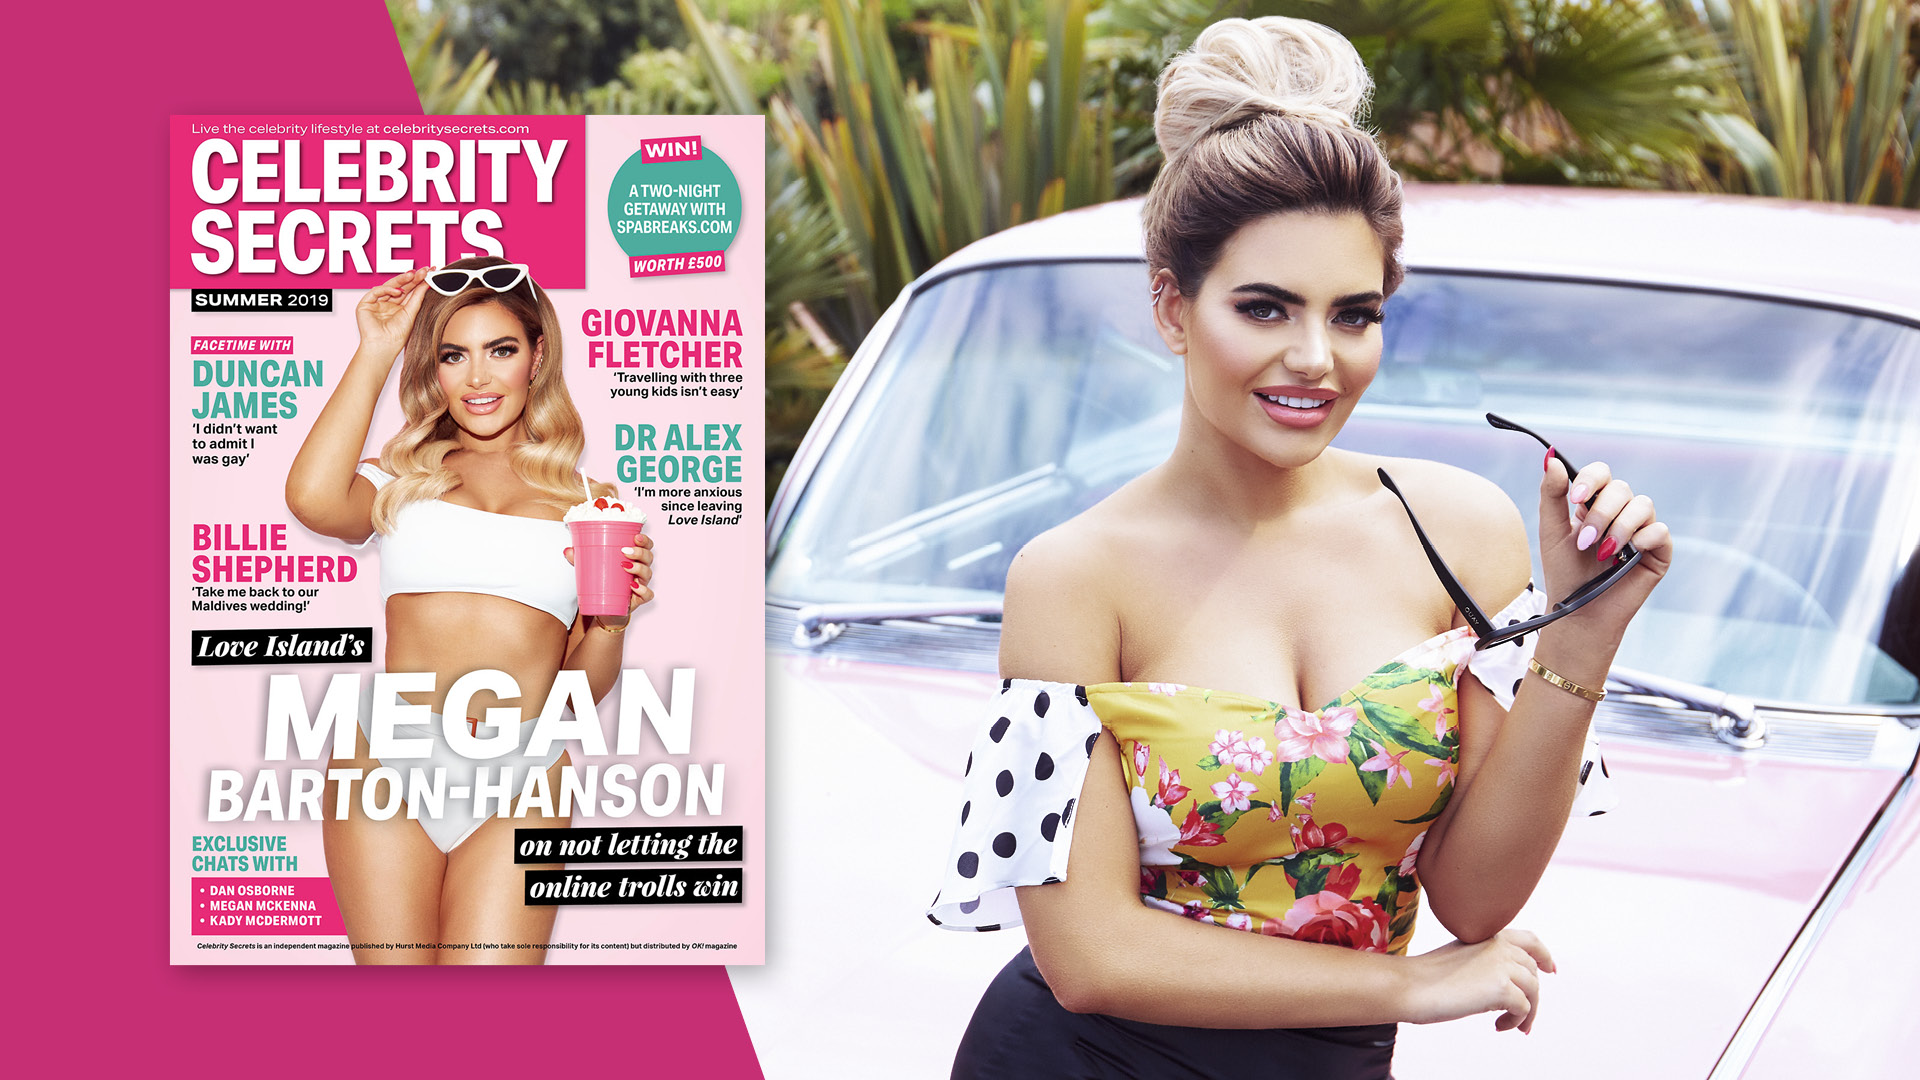 EXCLUSIVE INTERVIEW WITH MEGAN BARTON-HANSON INSIDE CELEBRITY SECRETS: THE SUMMER ISSUE OUT NOW!